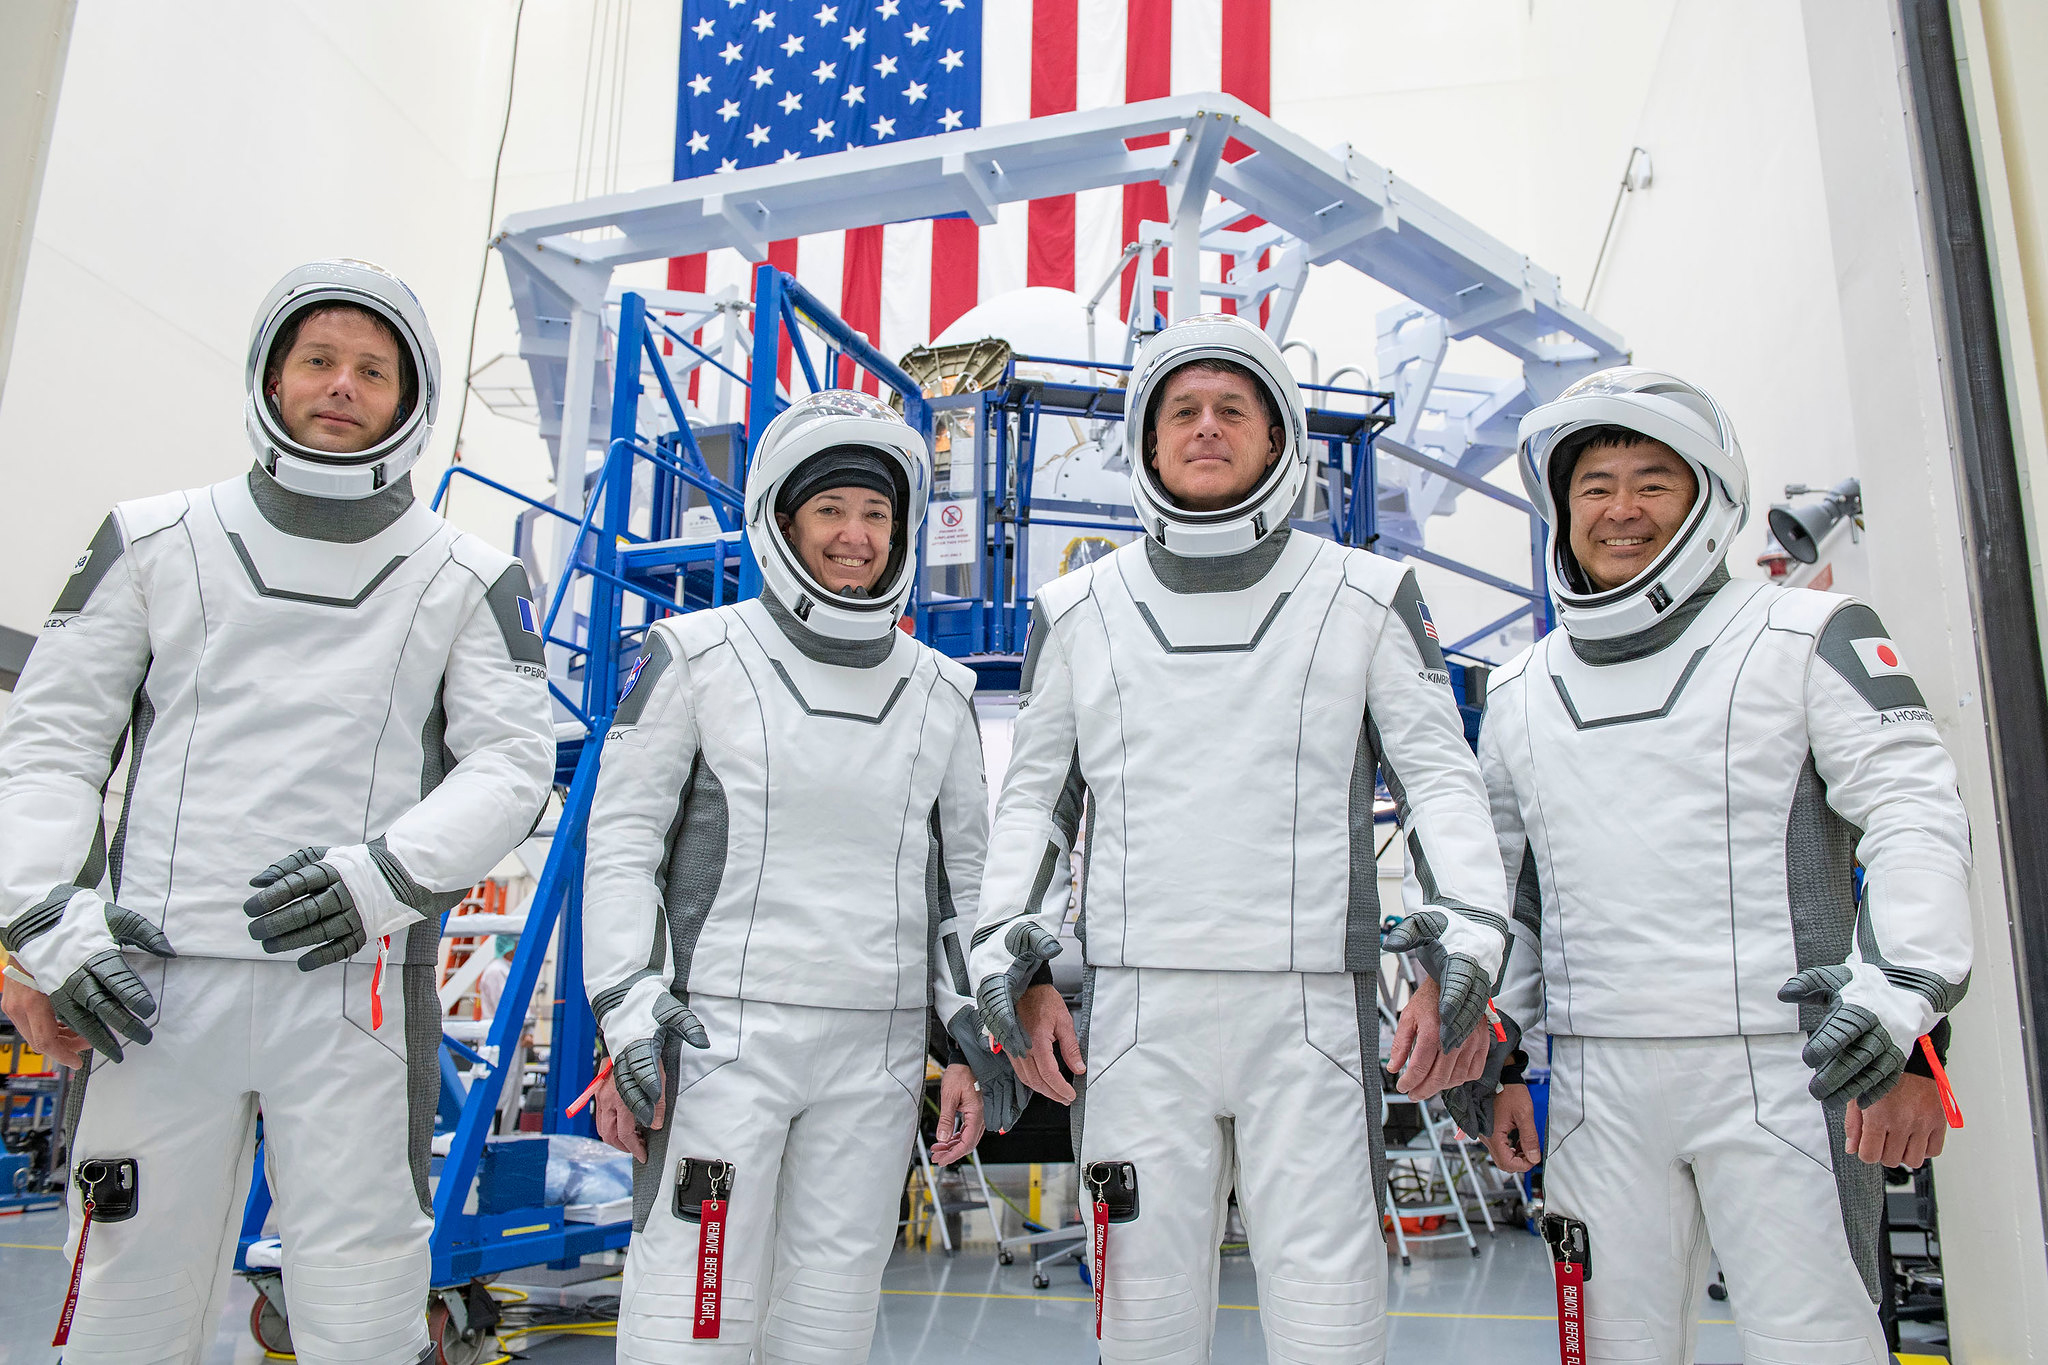 PHOTO: The crew for the second long-duration SpaceX Crew Dragon mission to the International Space Station, NASA’s SpaceX Crew-2, are pictured during a training session at the SpaceX training facility in Hawthorne, Calif.